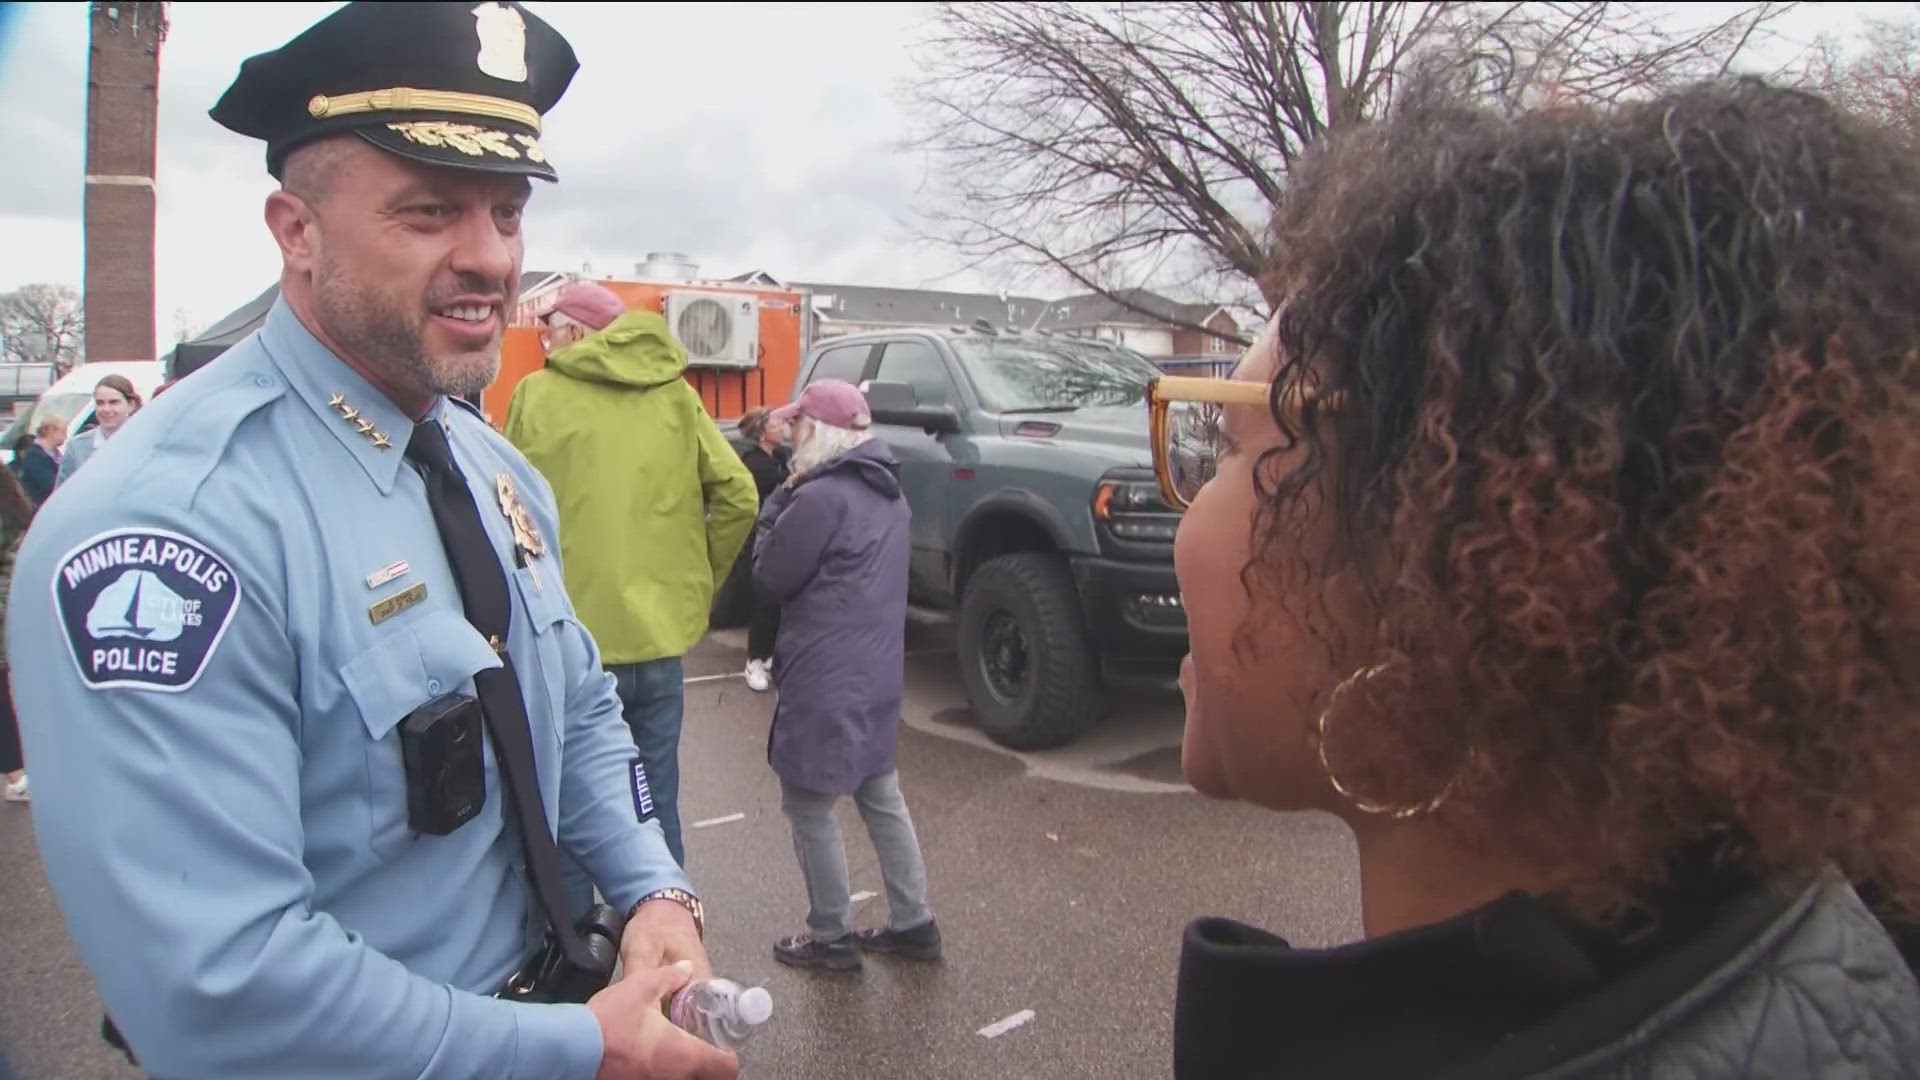 "This is who we're here for, we're here for the community," Chief Brian O'Hara said.